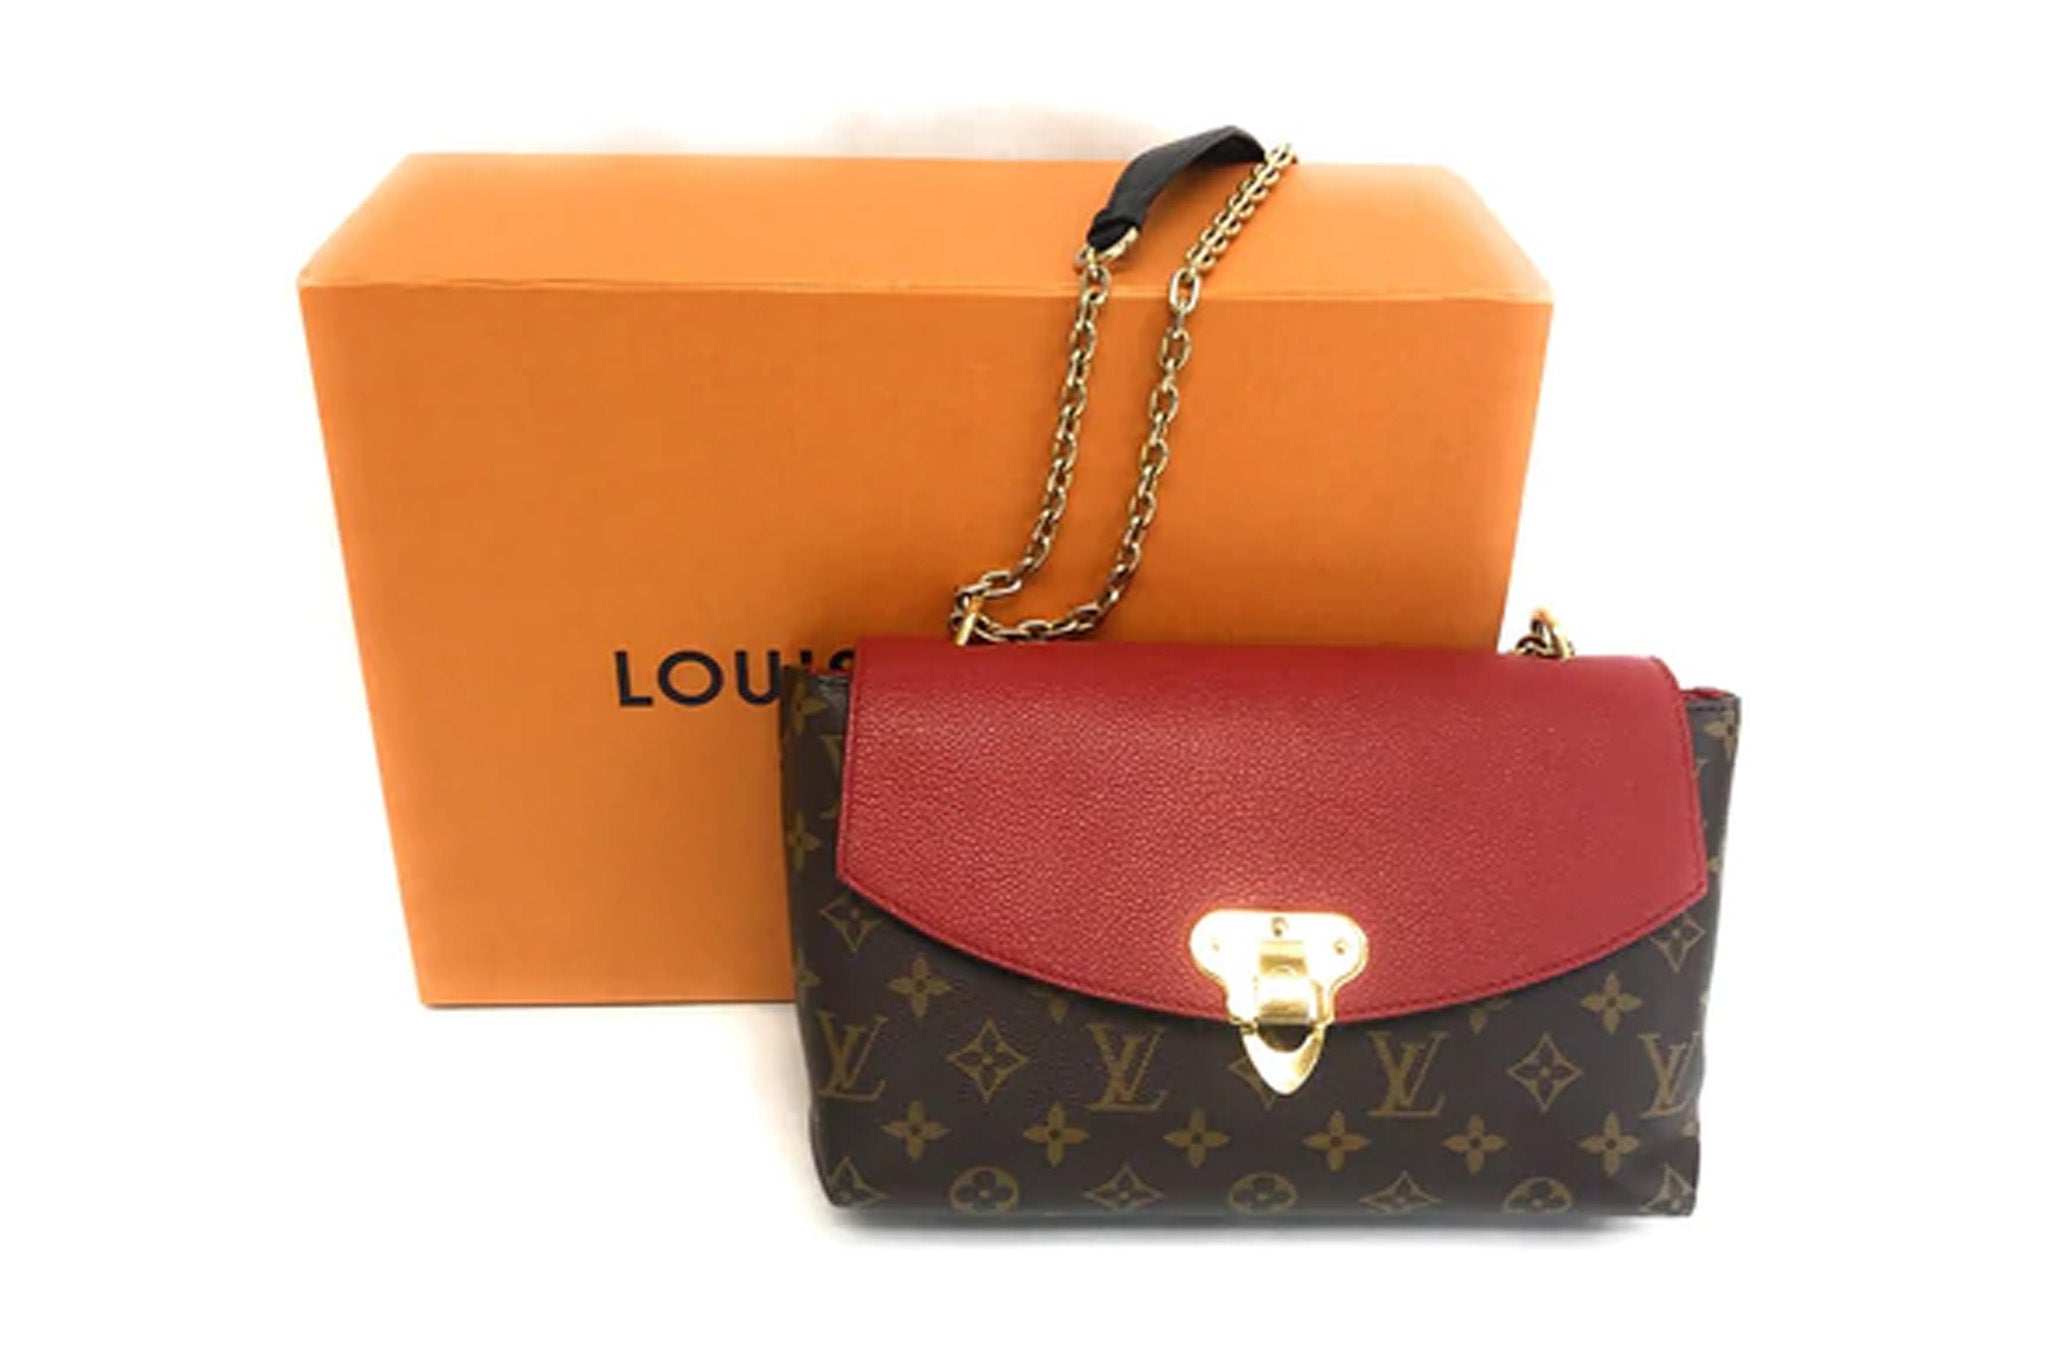 louis vuittons handbags authentic used buy it now – St. John's